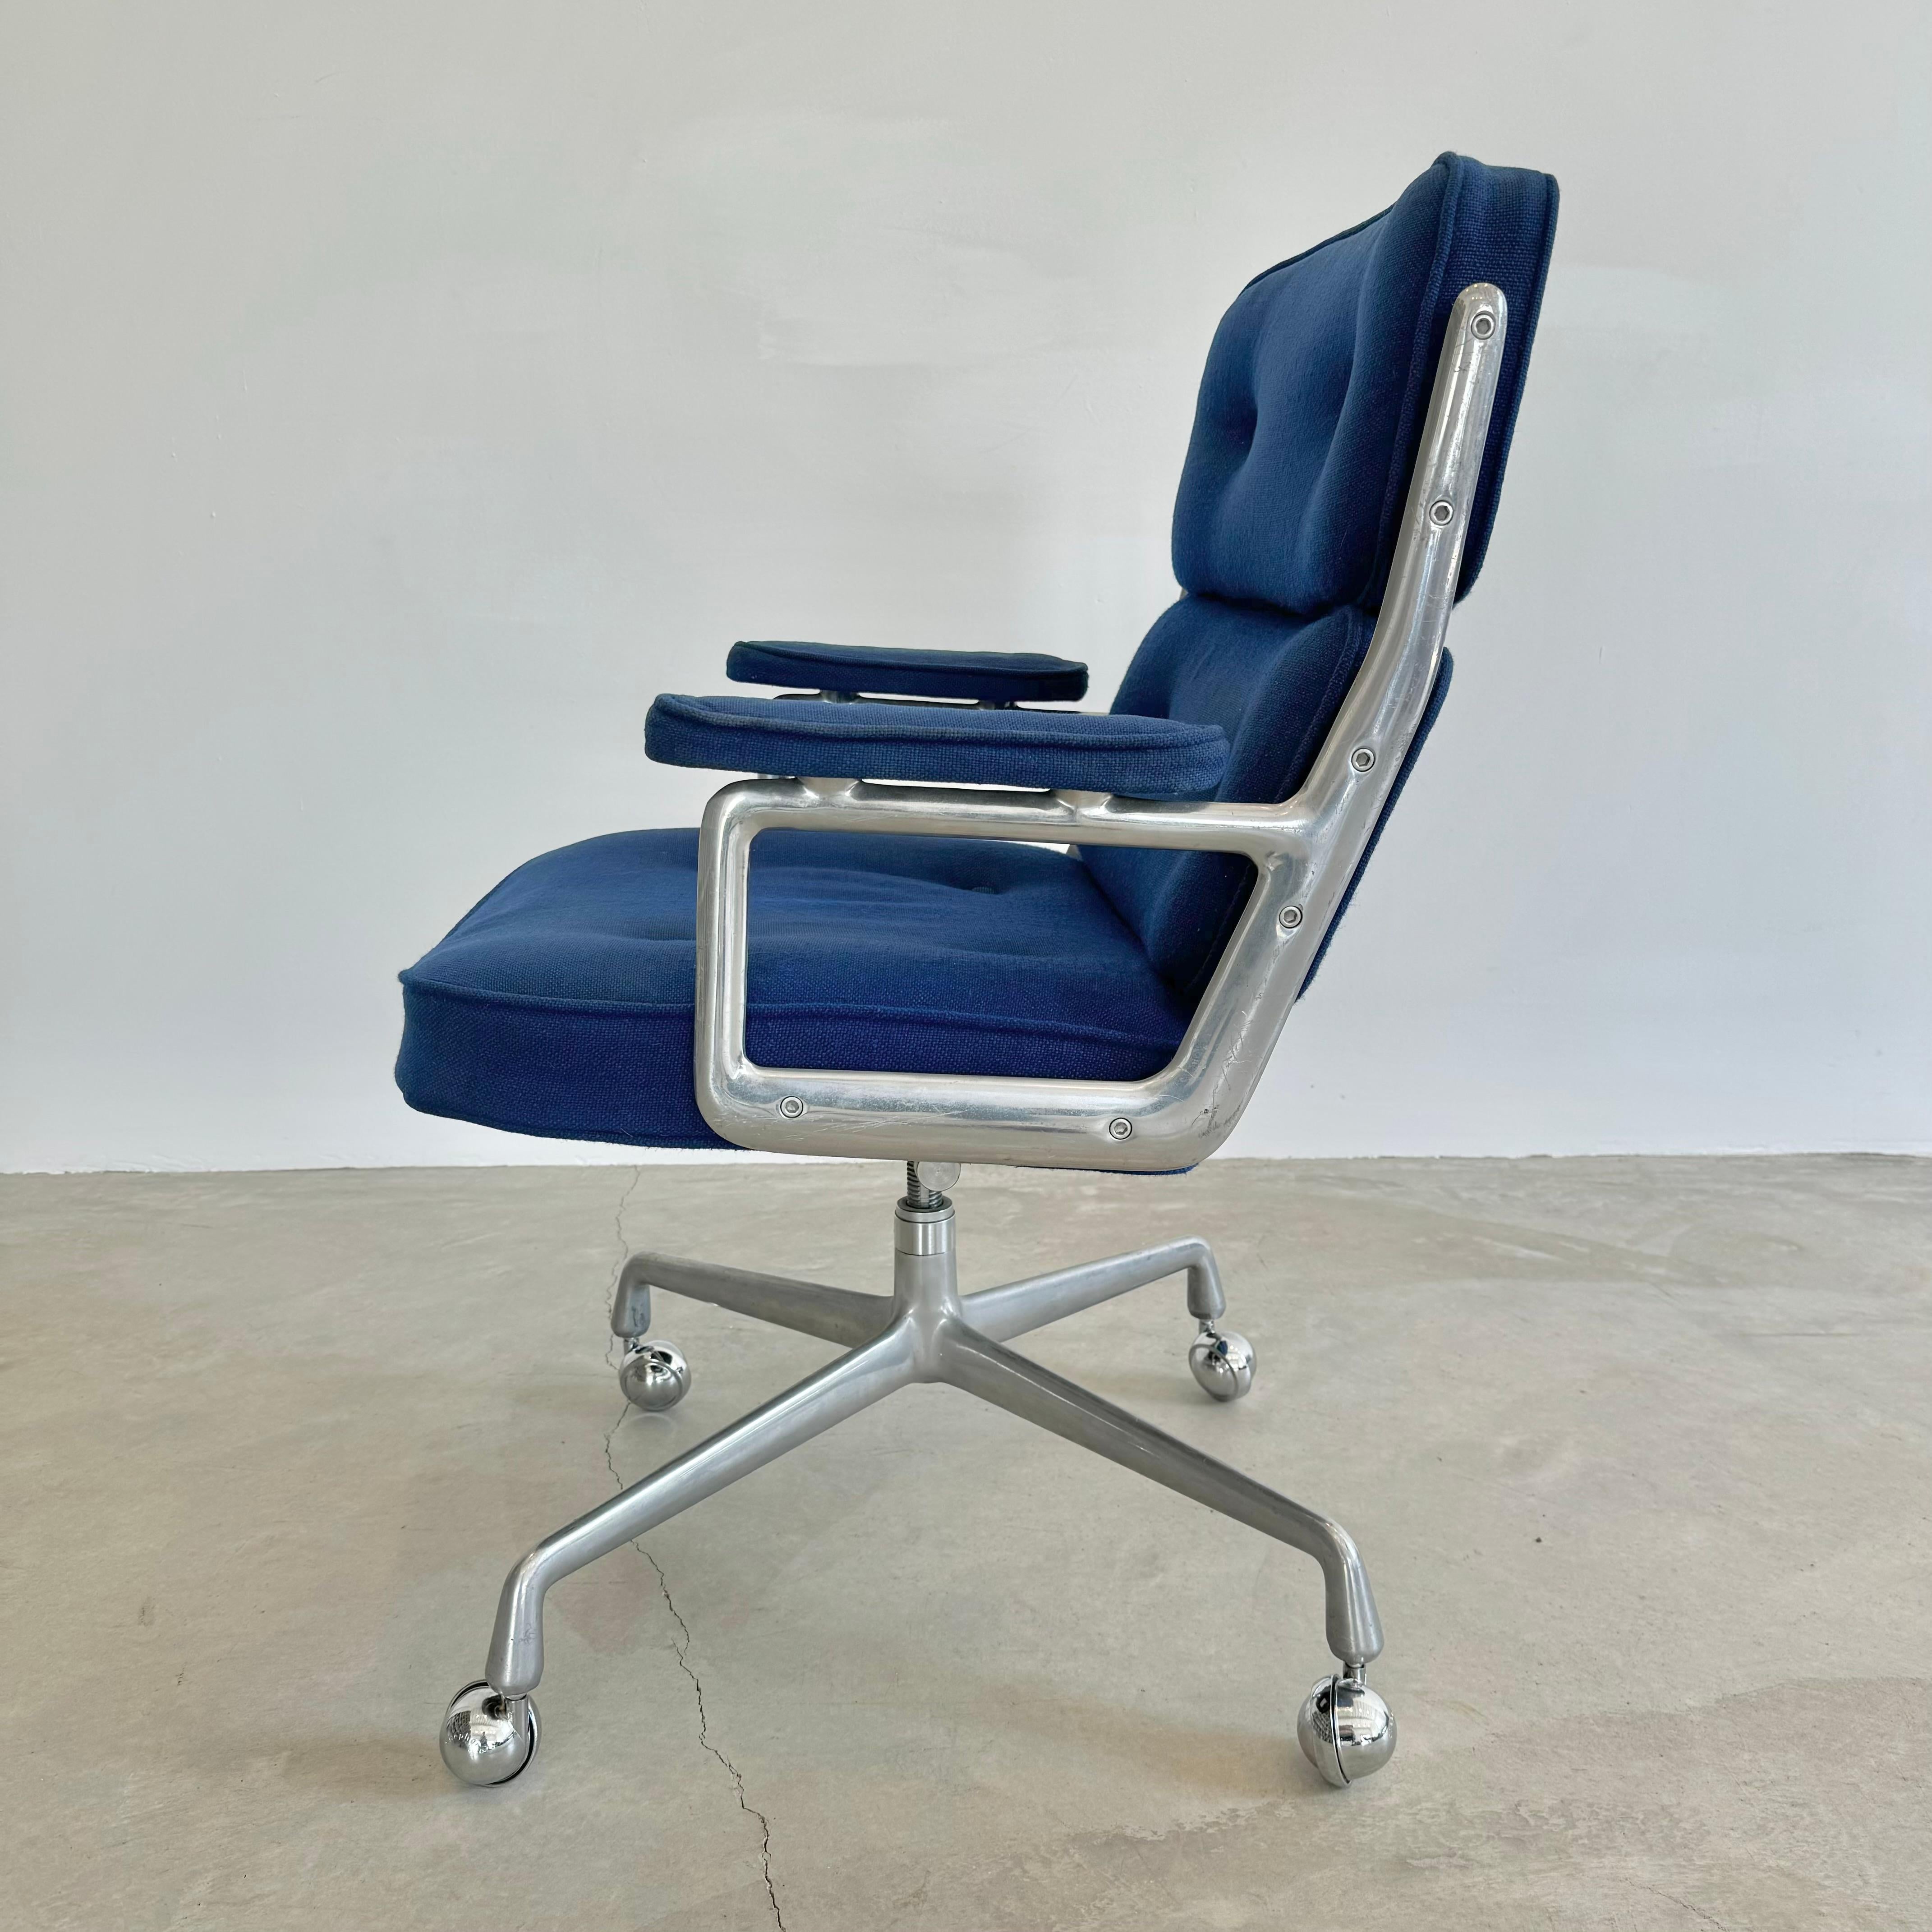 Mid-Century Modern Eames Time Life Chair in Navy Blue Burlap for Herman Miller, 1978 USA For Sale